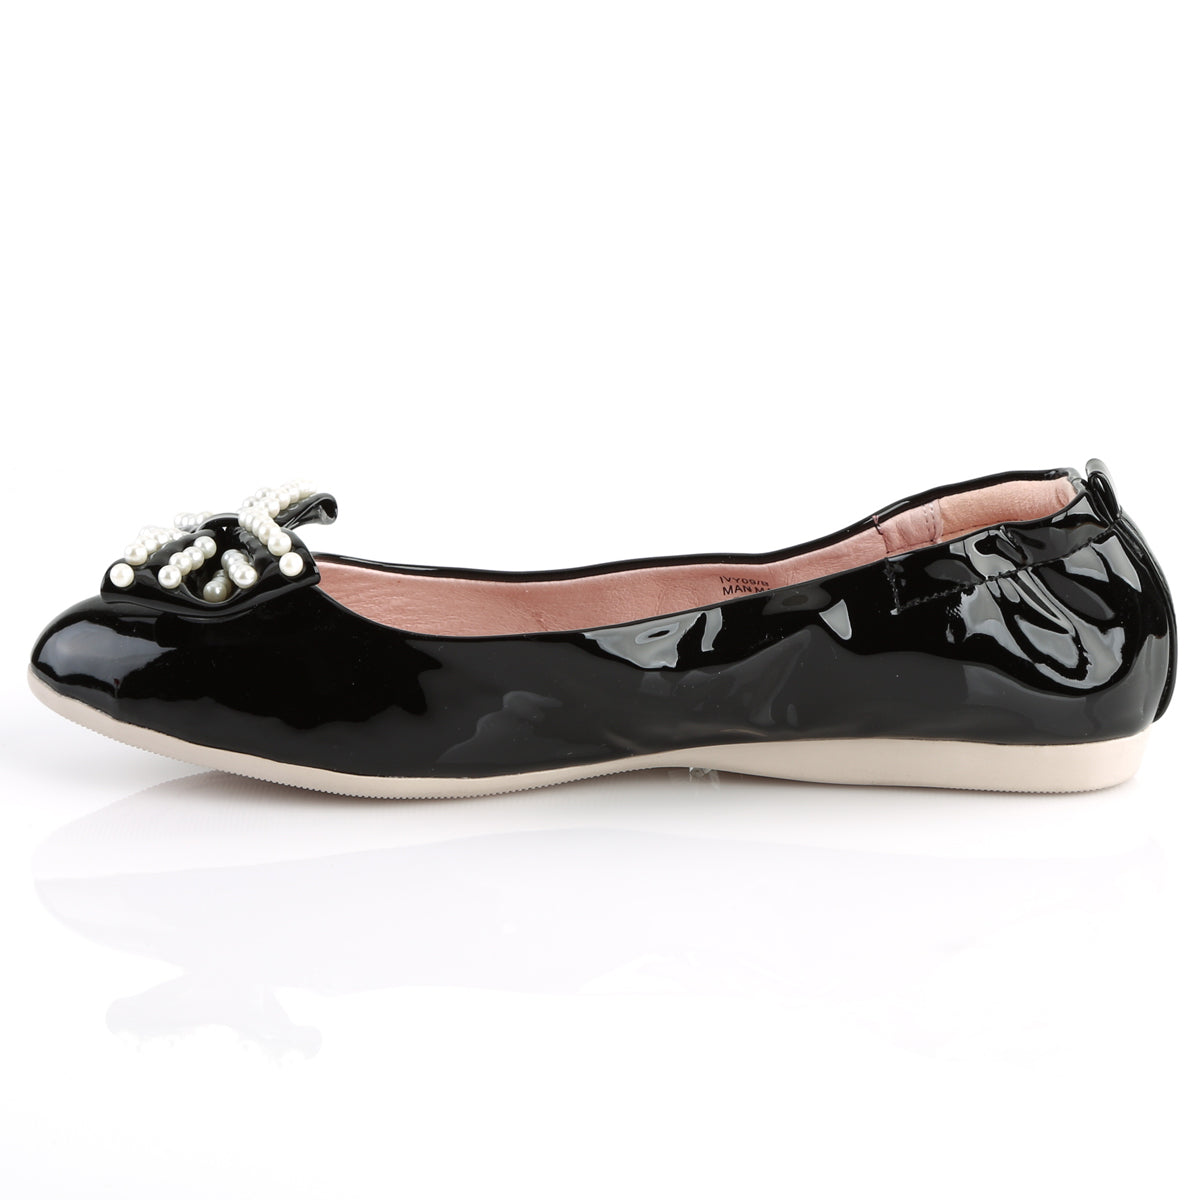 IVY-09 Pin Up Couture Black Patent Single Soles [Retro Glamour Shoes]